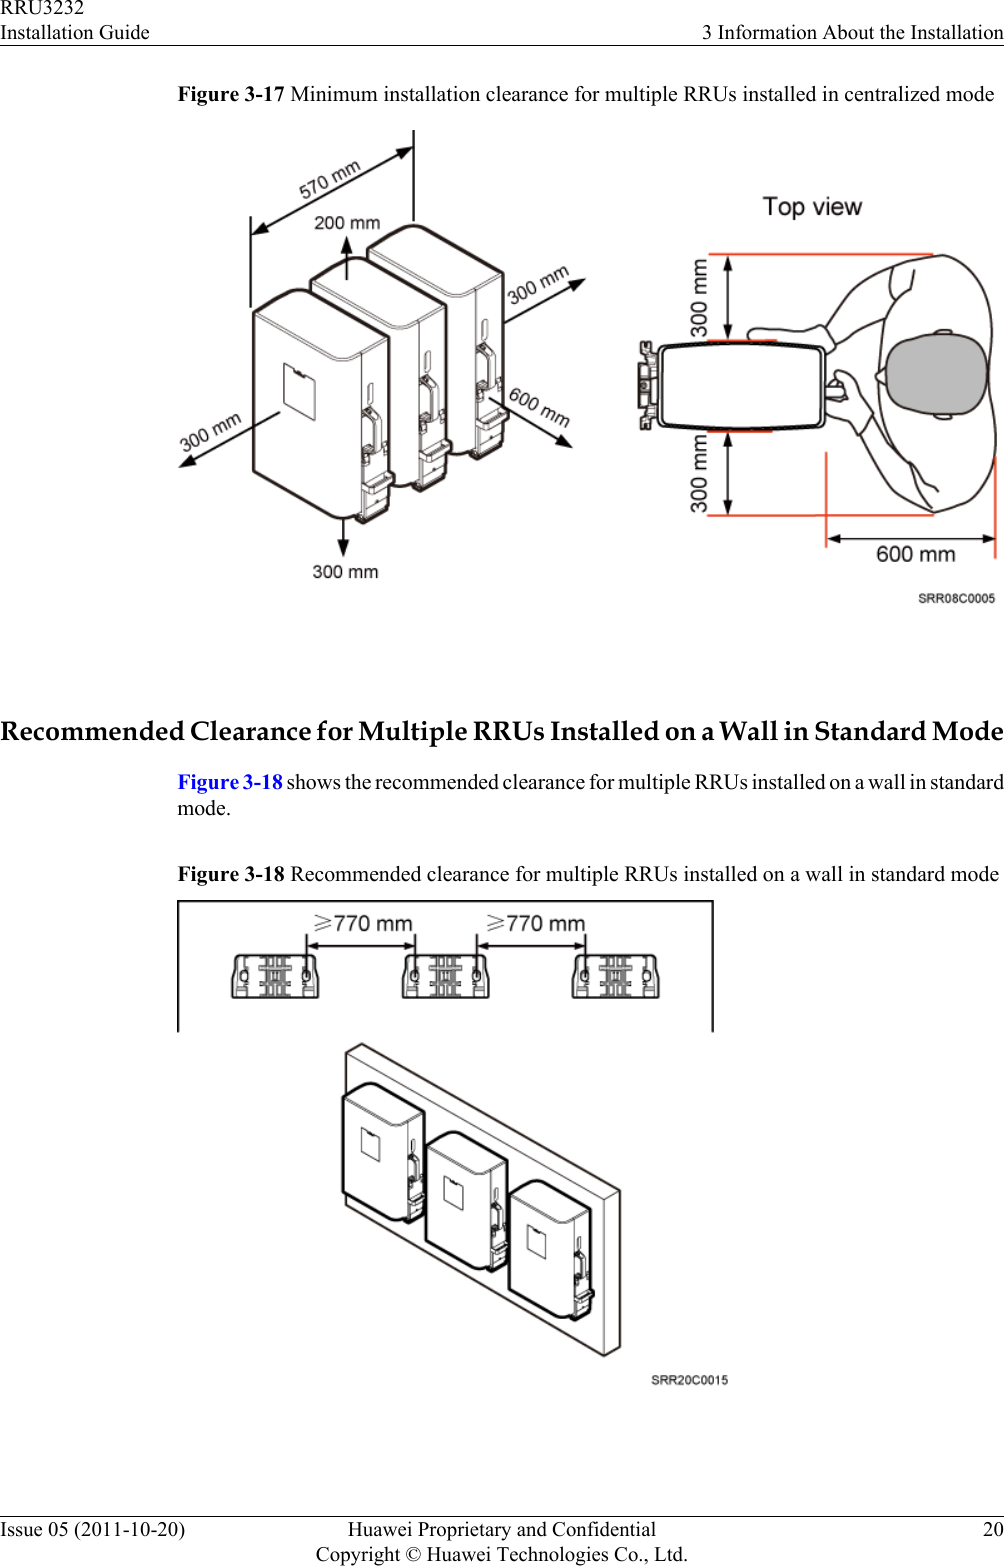 Figure 3-17 Minimum installation clearance for multiple RRUs installed in centralized mode Recommended Clearance for Multiple RRUs Installed on a Wall in Standard ModeFigure 3-18 shows the recommended clearance for multiple RRUs installed on a wall in standardmode.Figure 3-18 Recommended clearance for multiple RRUs installed on a wall in standard mode RRU3232Installation Guide 3 Information About the InstallationIssue 05 (2011-10-20) Huawei Proprietary and ConfidentialCopyright © Huawei Technologies Co., Ltd.20